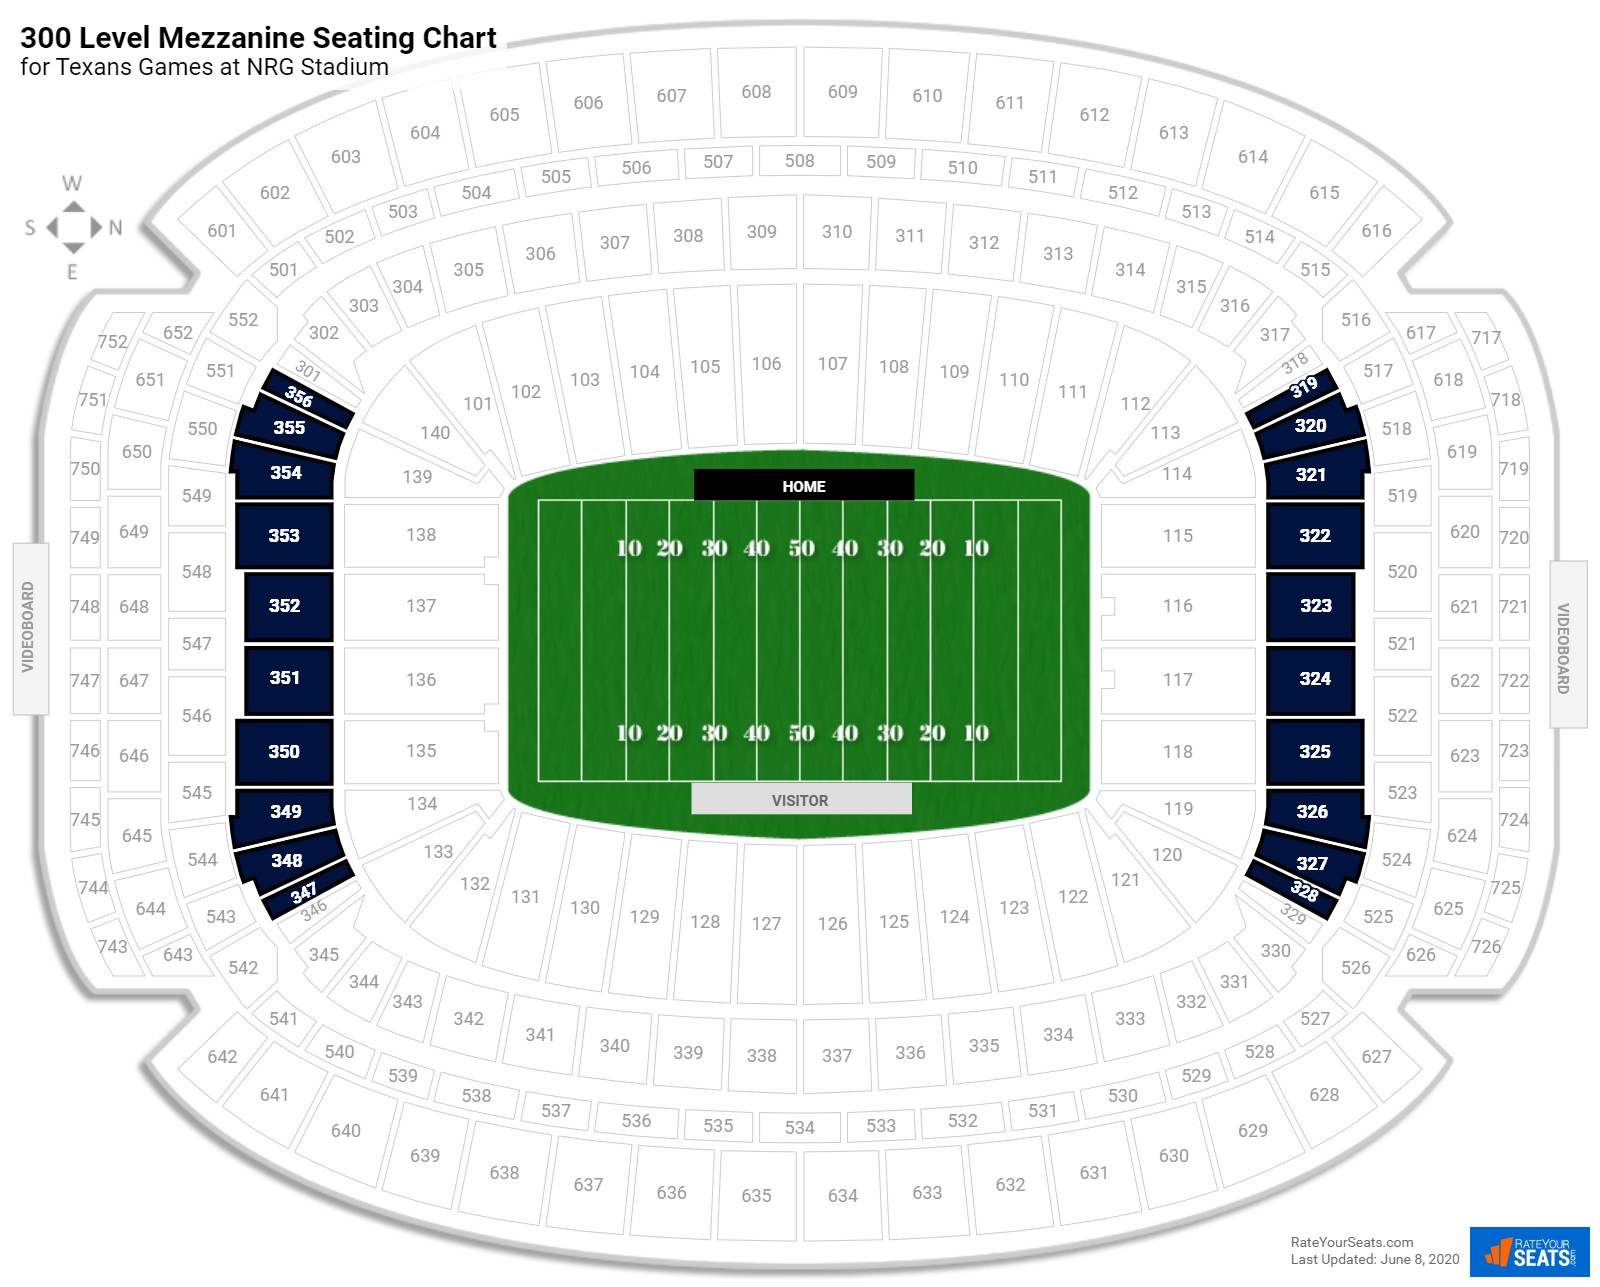 Nrg stadium seating chart with seat numbers